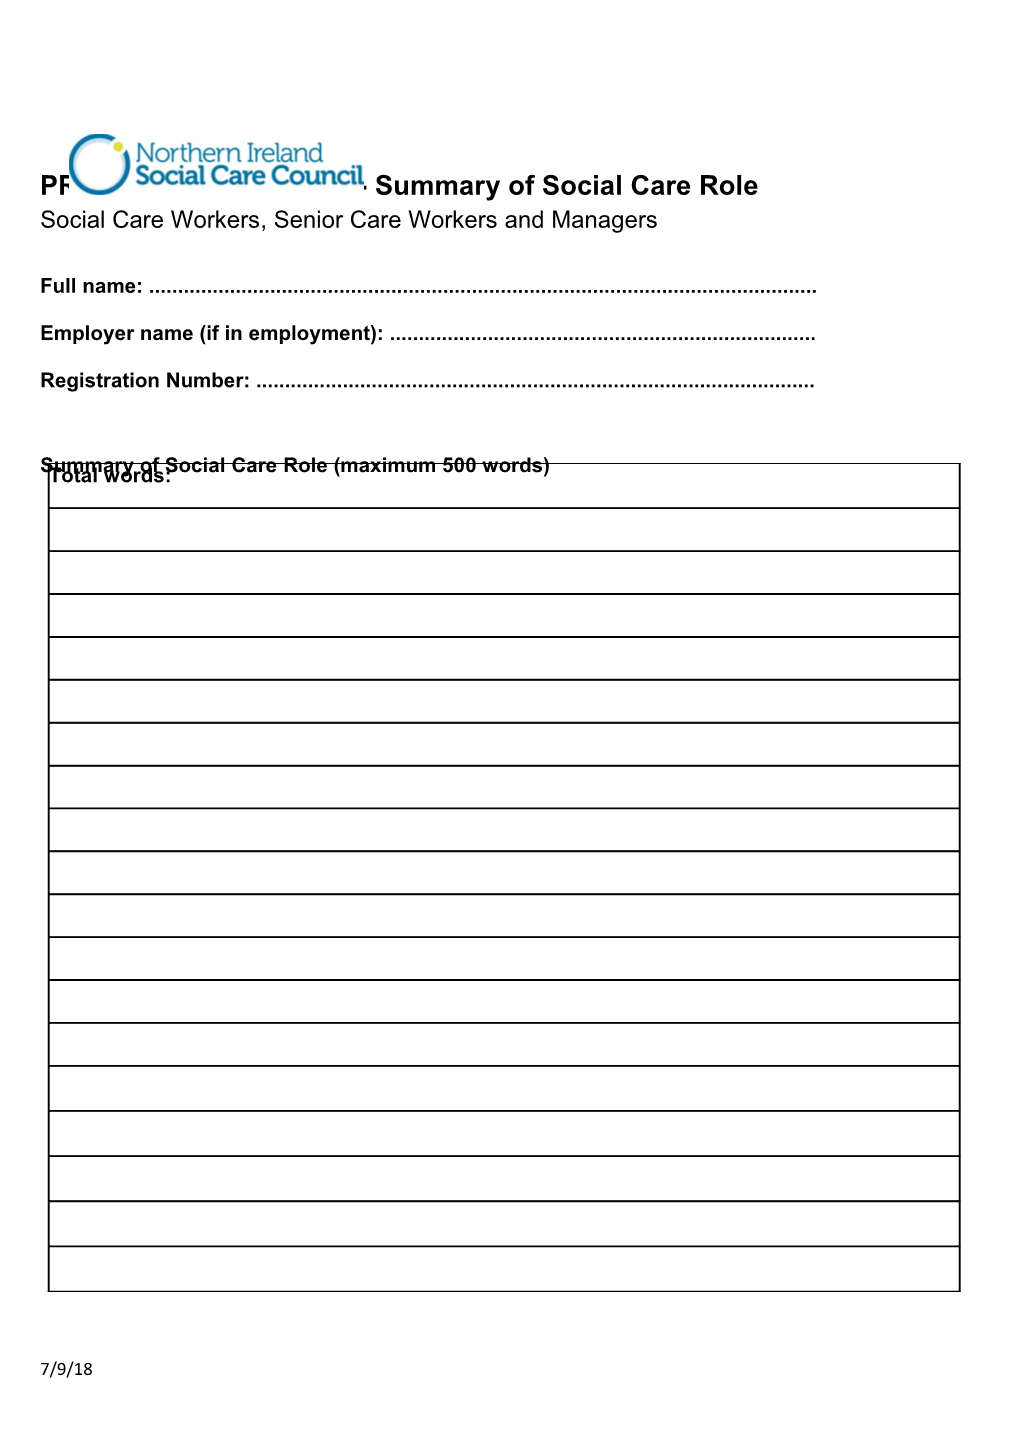 PRTL Submission Form - Summary of Social Care Role